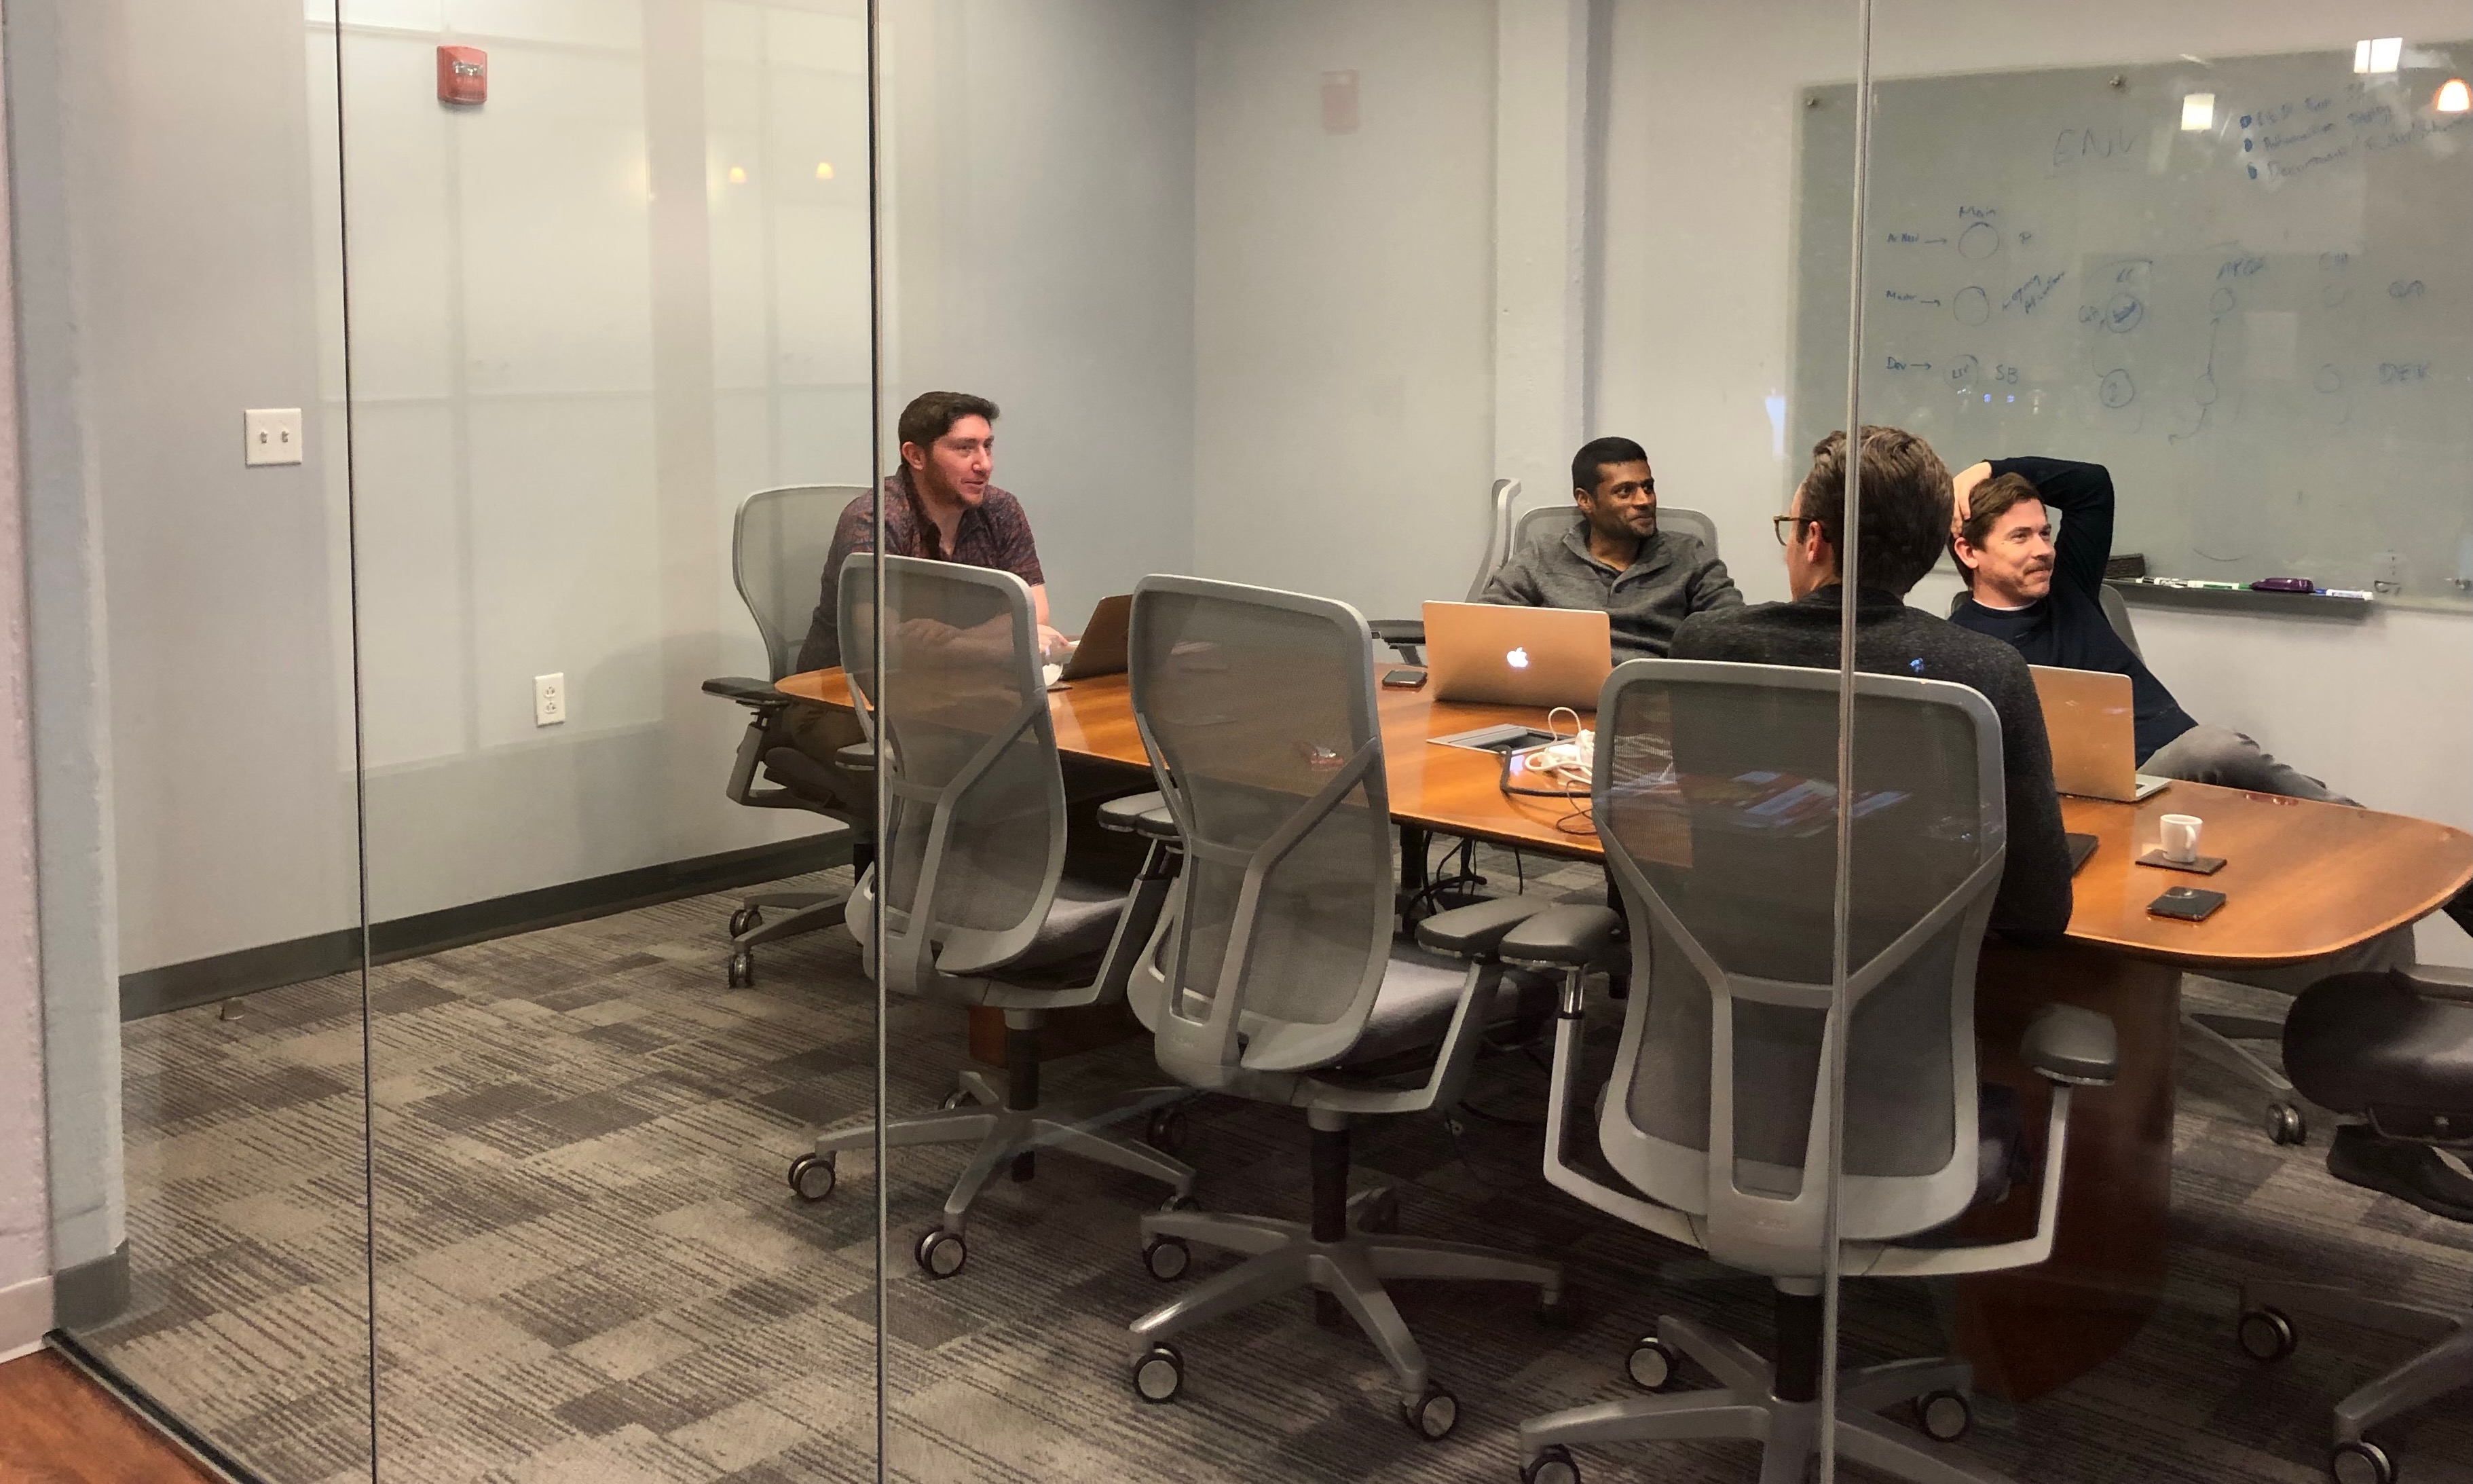 Photo of team meeting in a conference room, taken from the outside looking in through a glass wall.